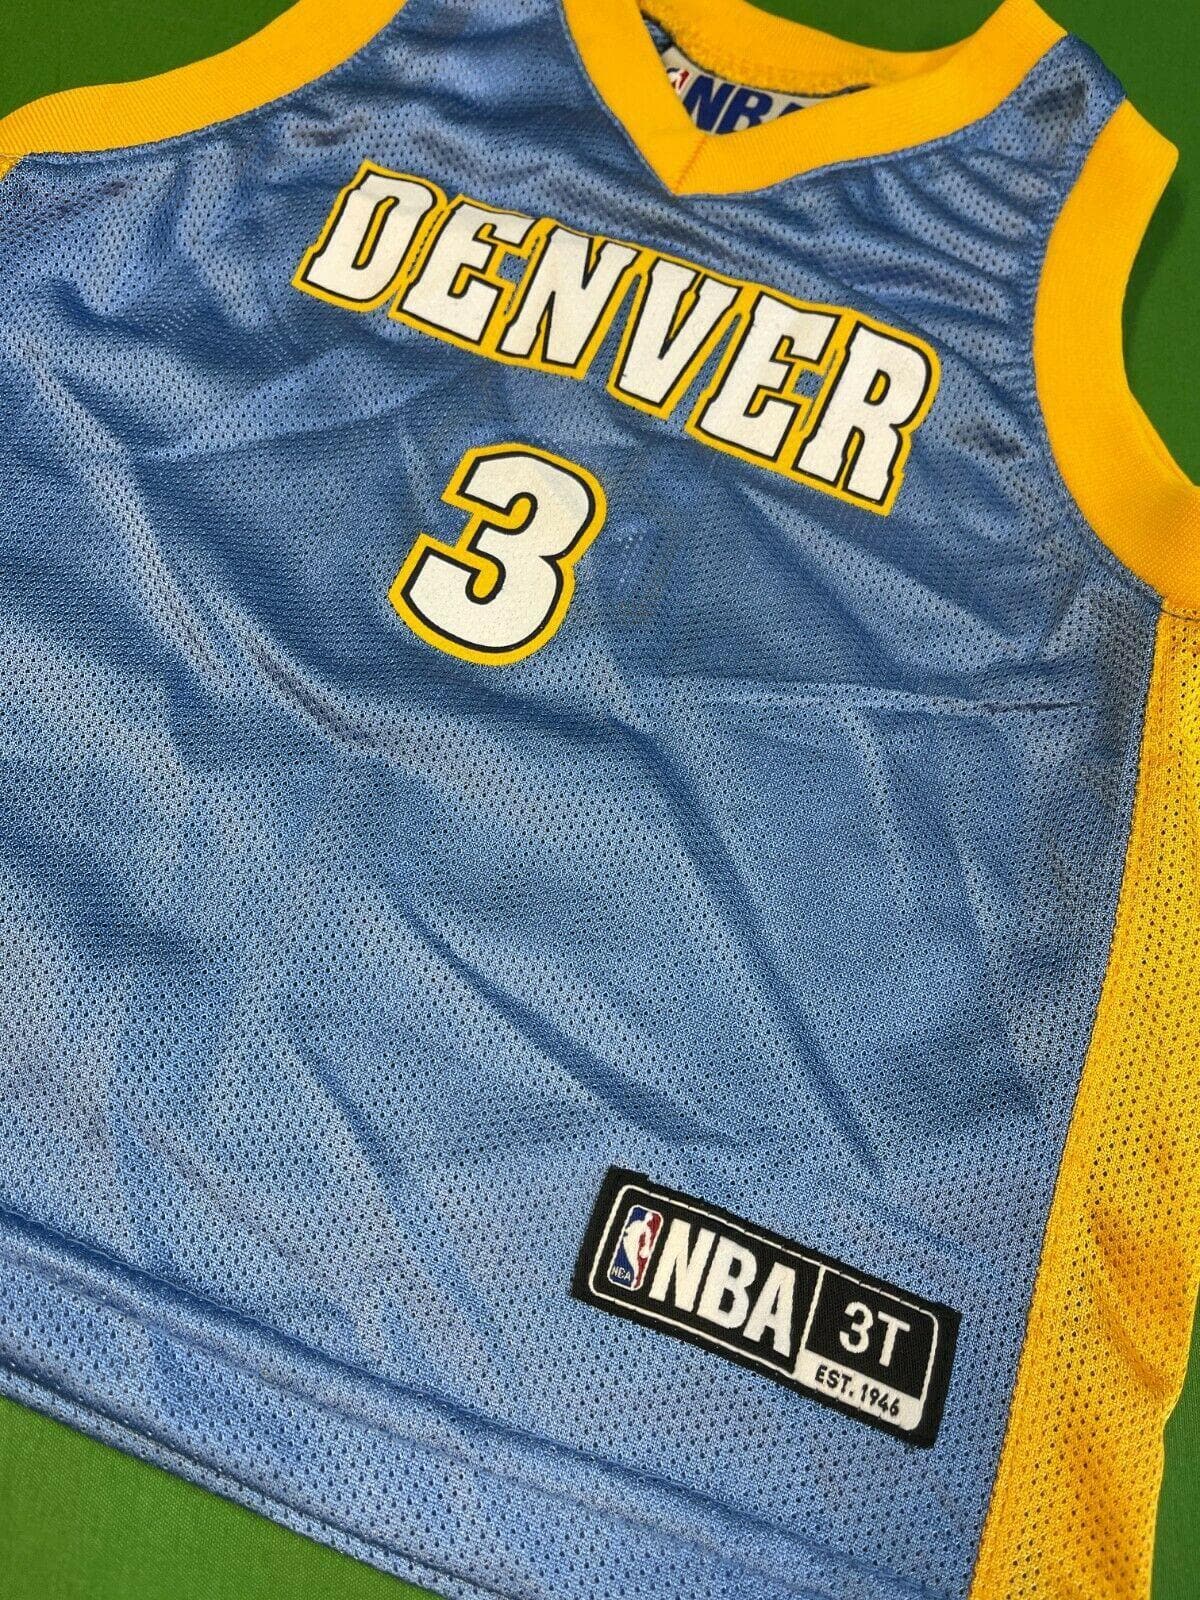 NBA Denver Nuggets Ty Lawson #3 Jersey Toddler 3T